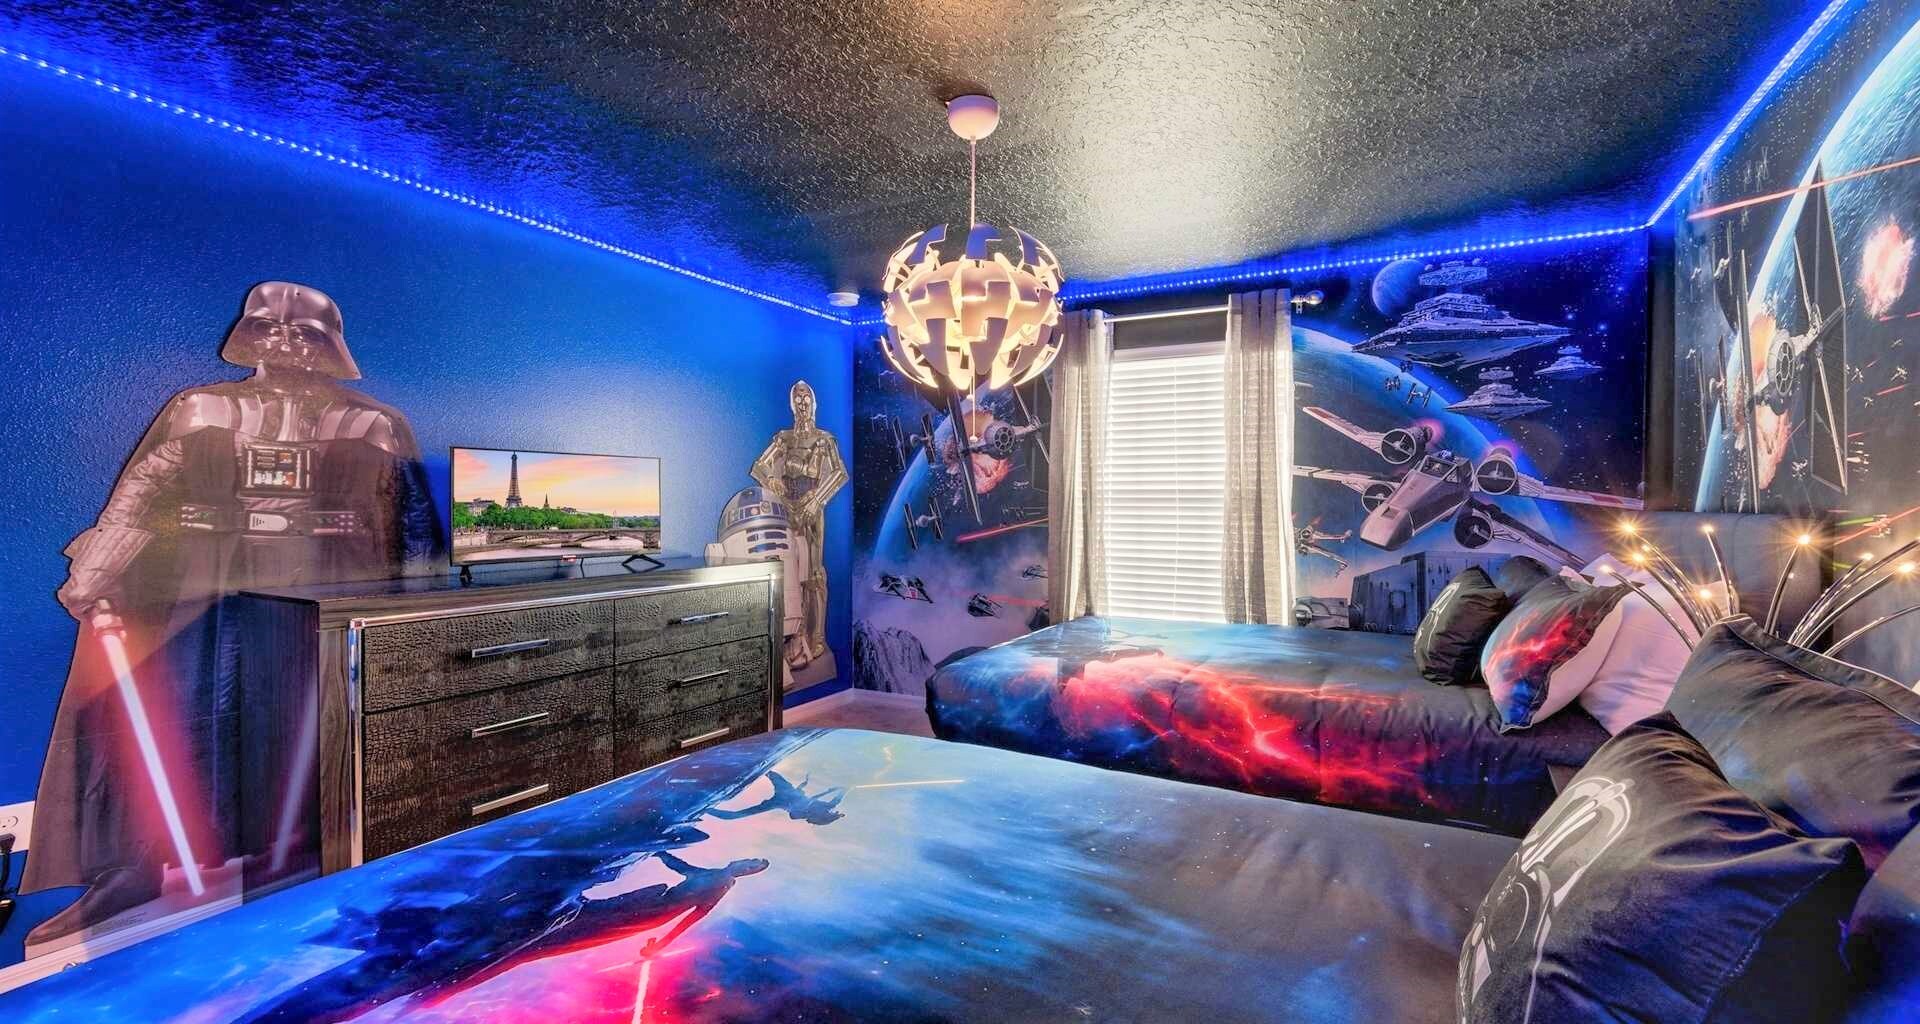 Kids will have fun in this Star Wars bedroom with stylish lights